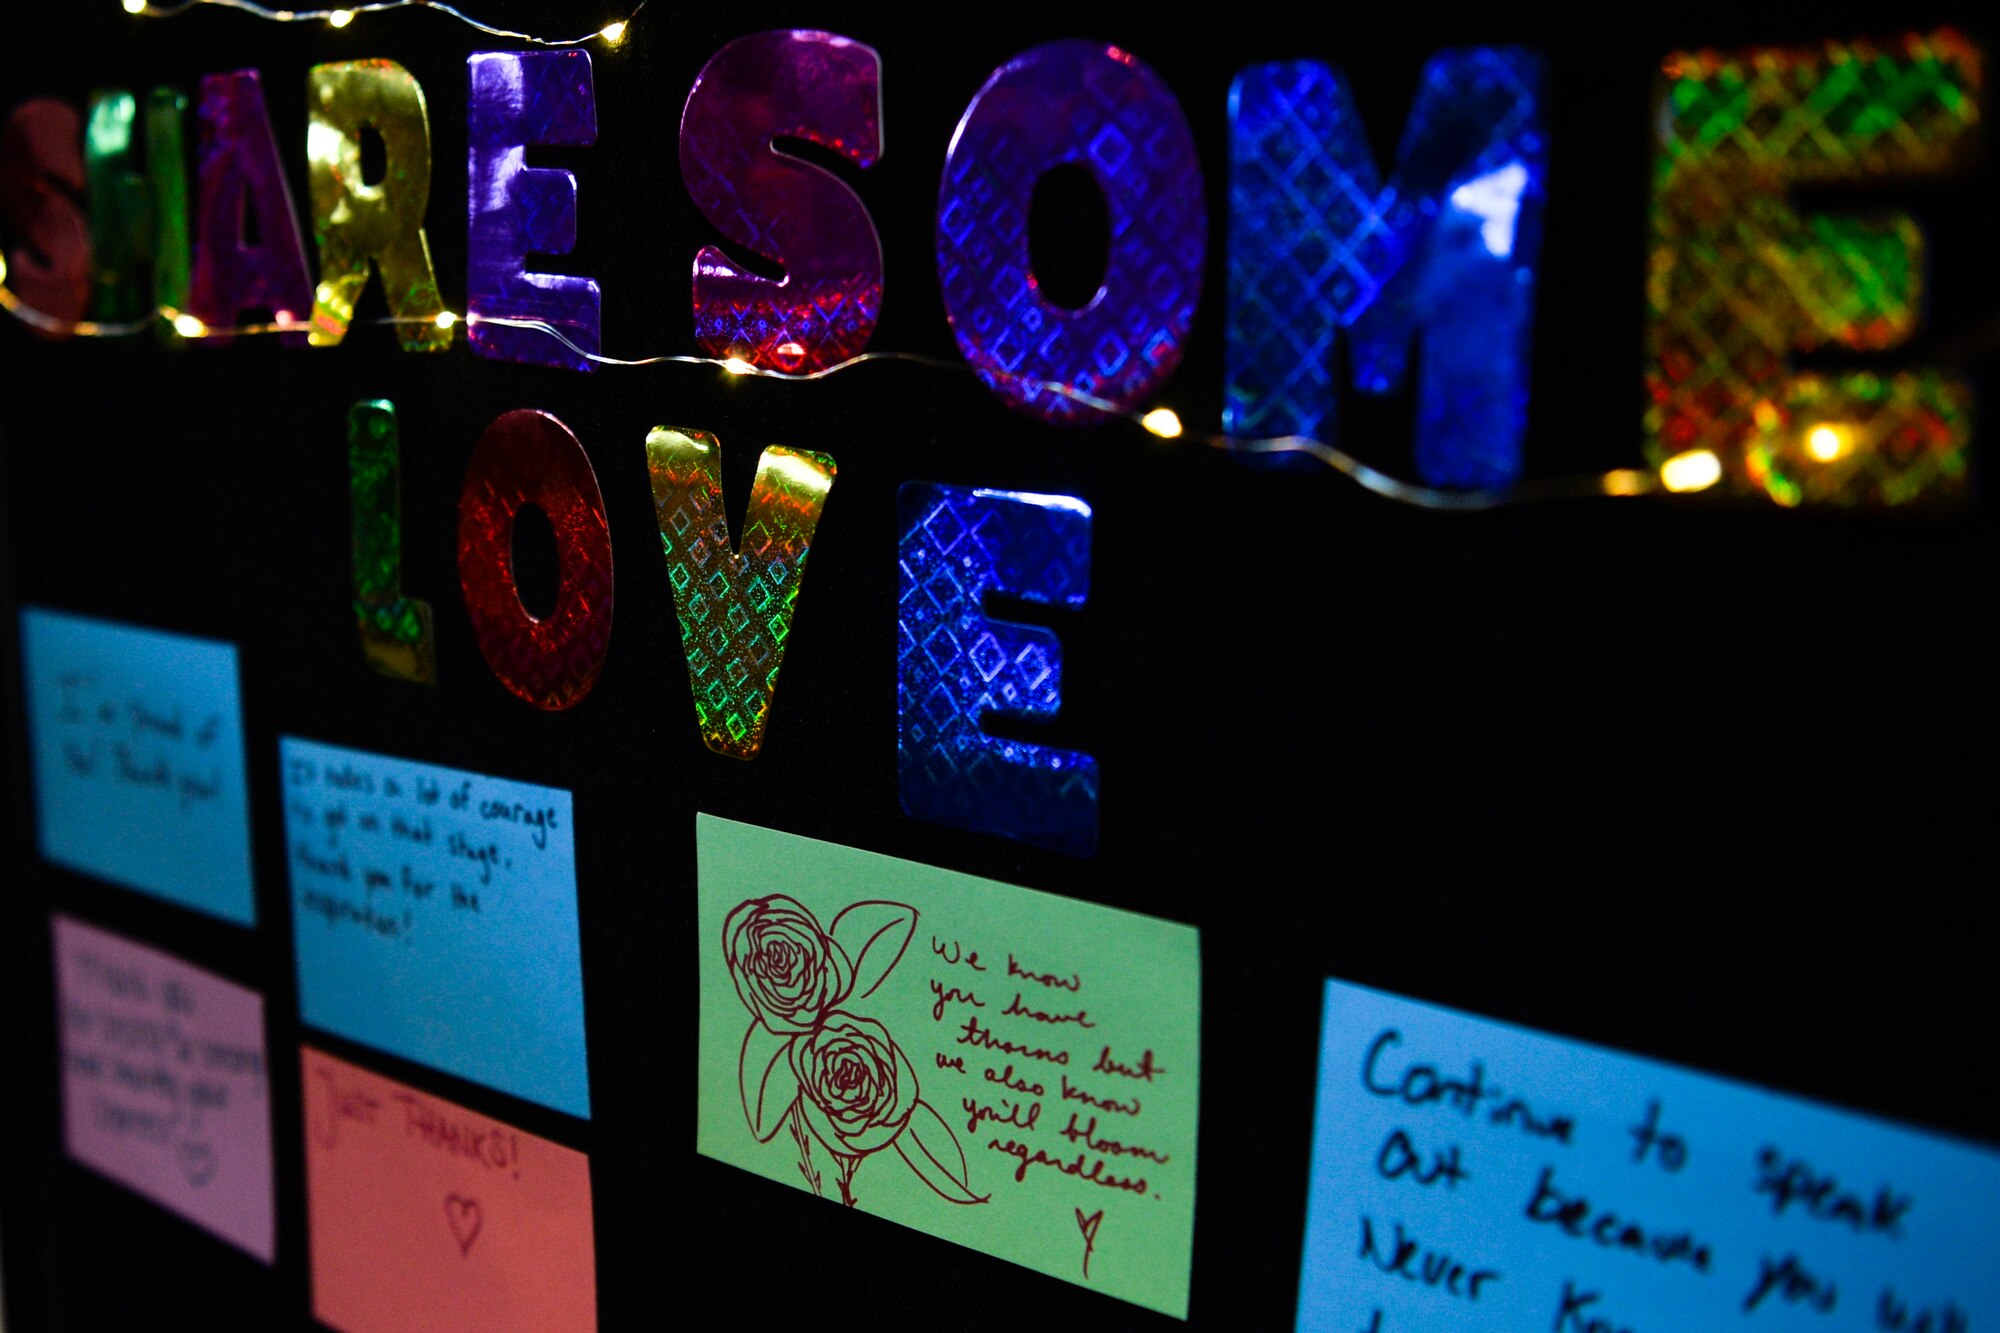 A “Show Some Love” display board is showcased at the entrance of a Storytellers event on Ramstein Air Base, Germany, Nov. 16, 2018. Storytellers is a resilience event which started at Incirlik Air Base, Turkey, in 2012 to support, aid, and promote understanding for Airmen enduring distressing events. (U.S. Air Force photo by Staff Sgt. Nesha Humes Stanton)